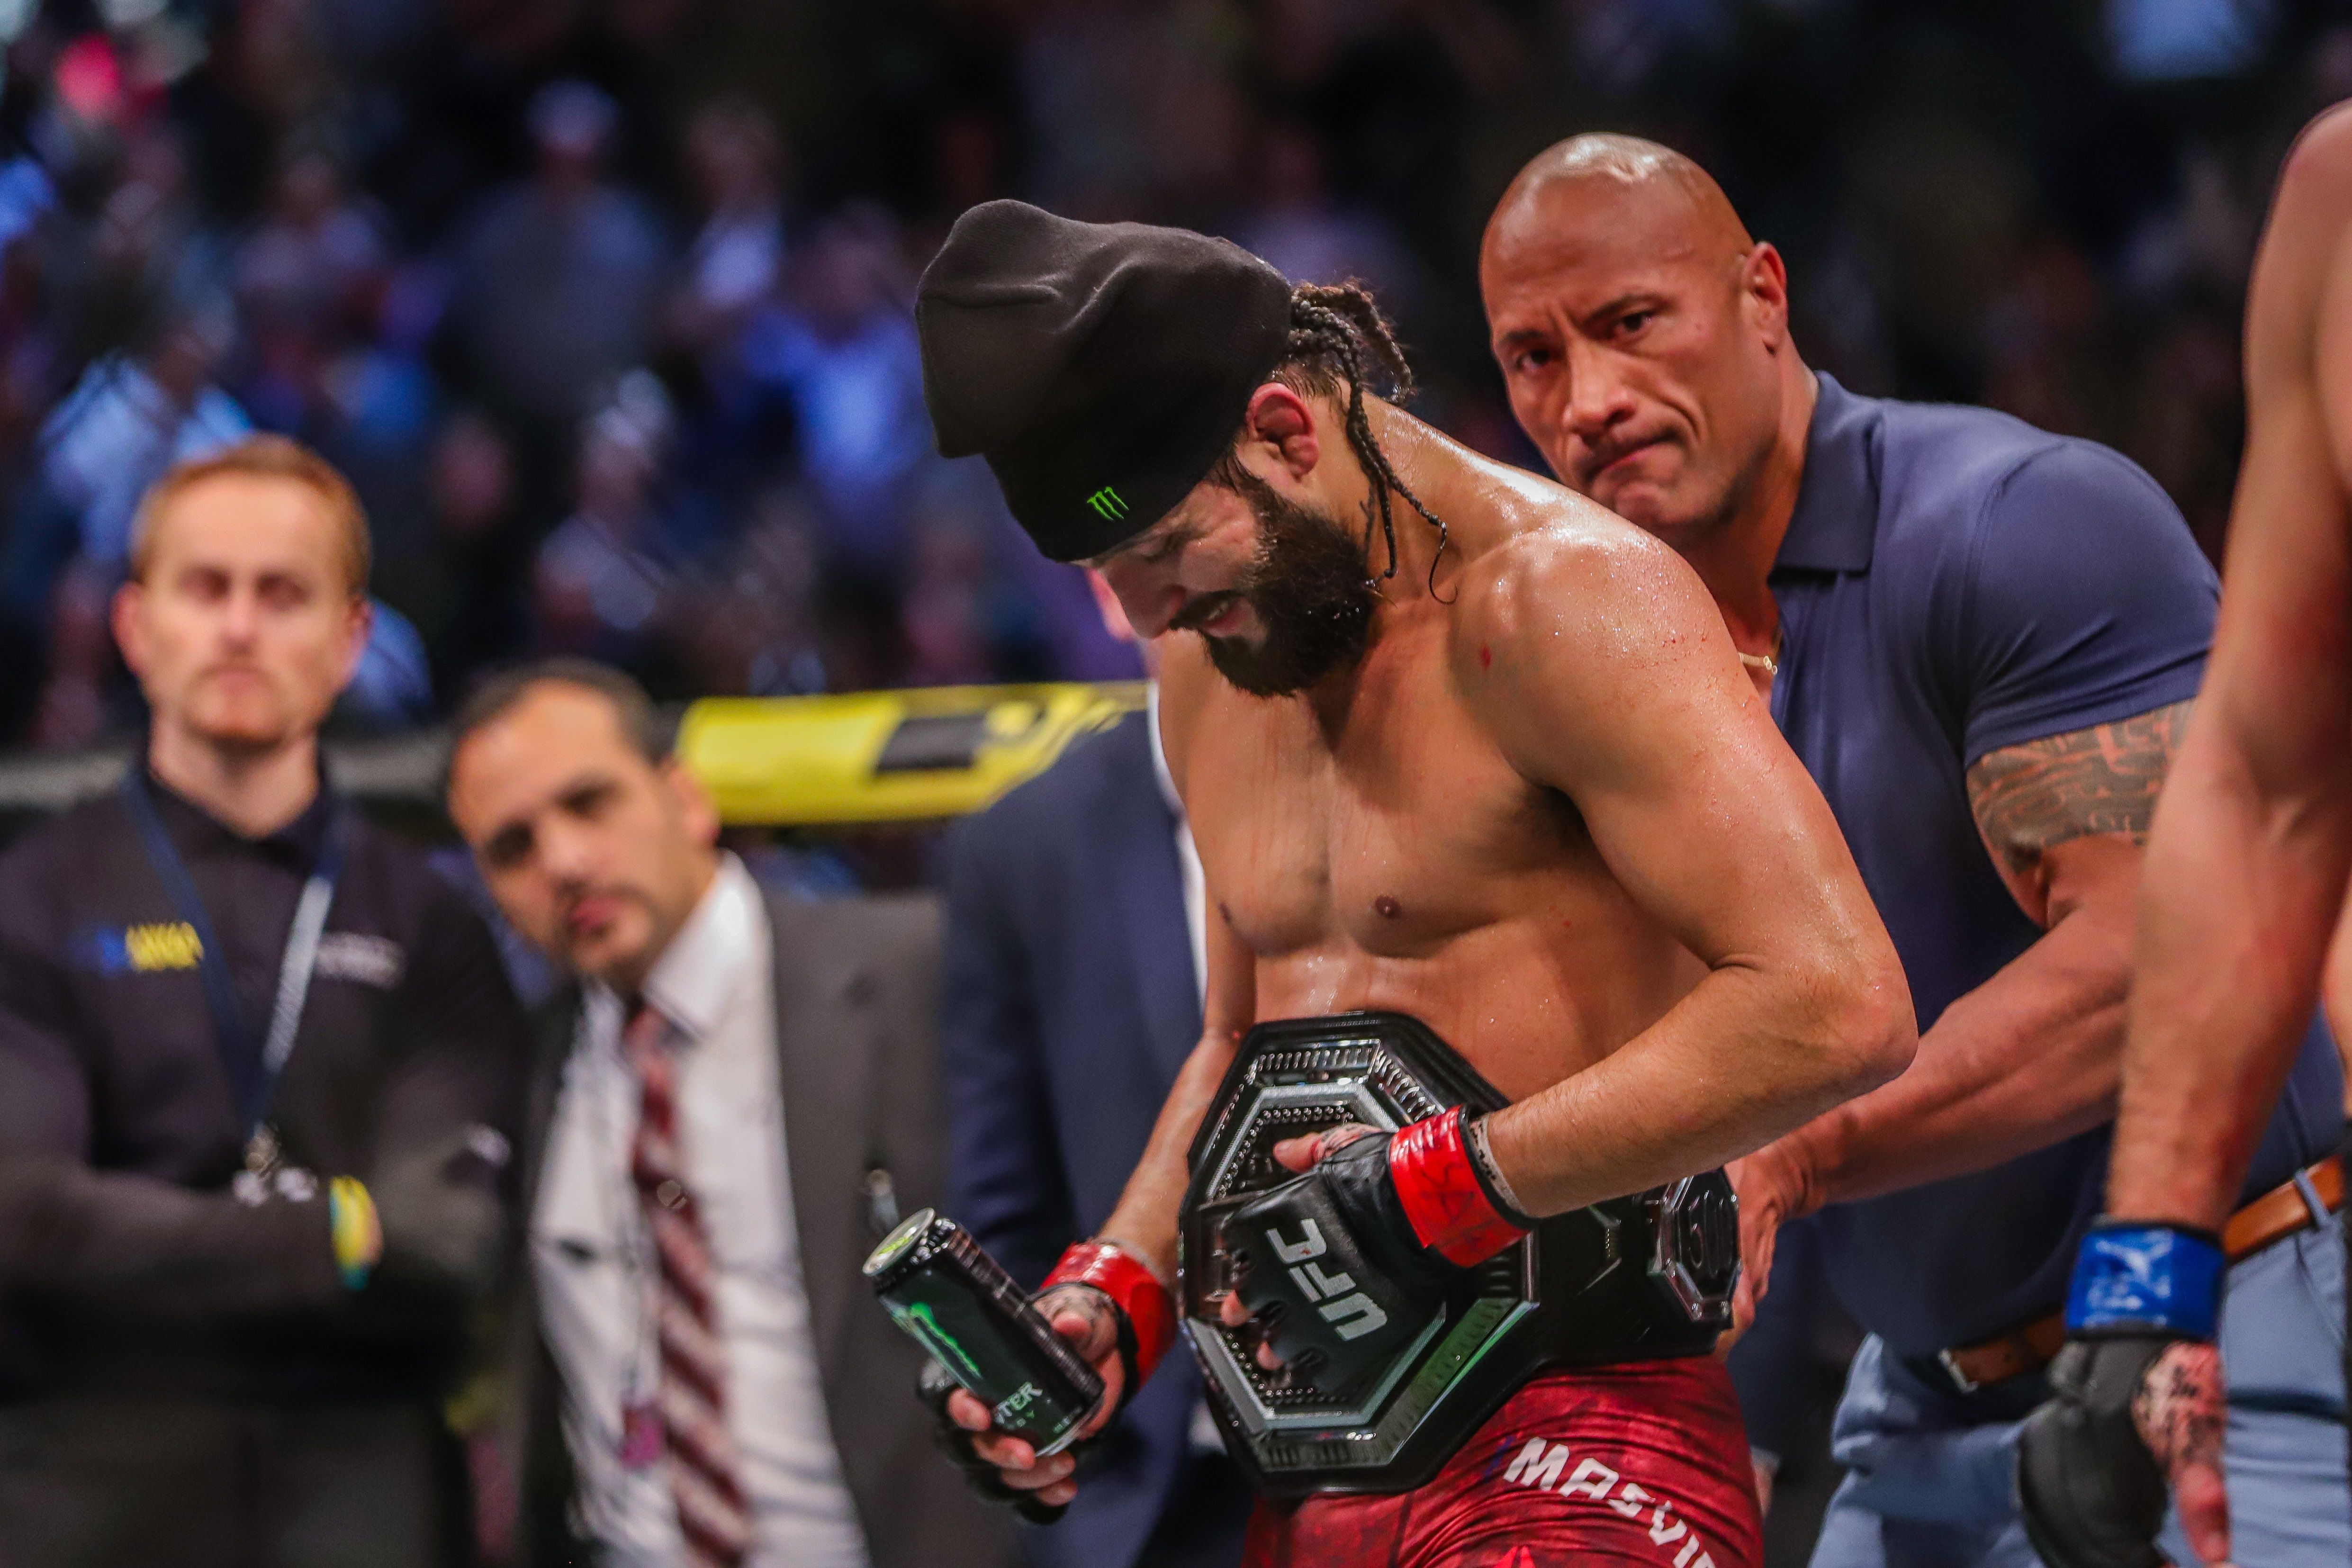 All The Latest Jorge Masvidal News and Stories